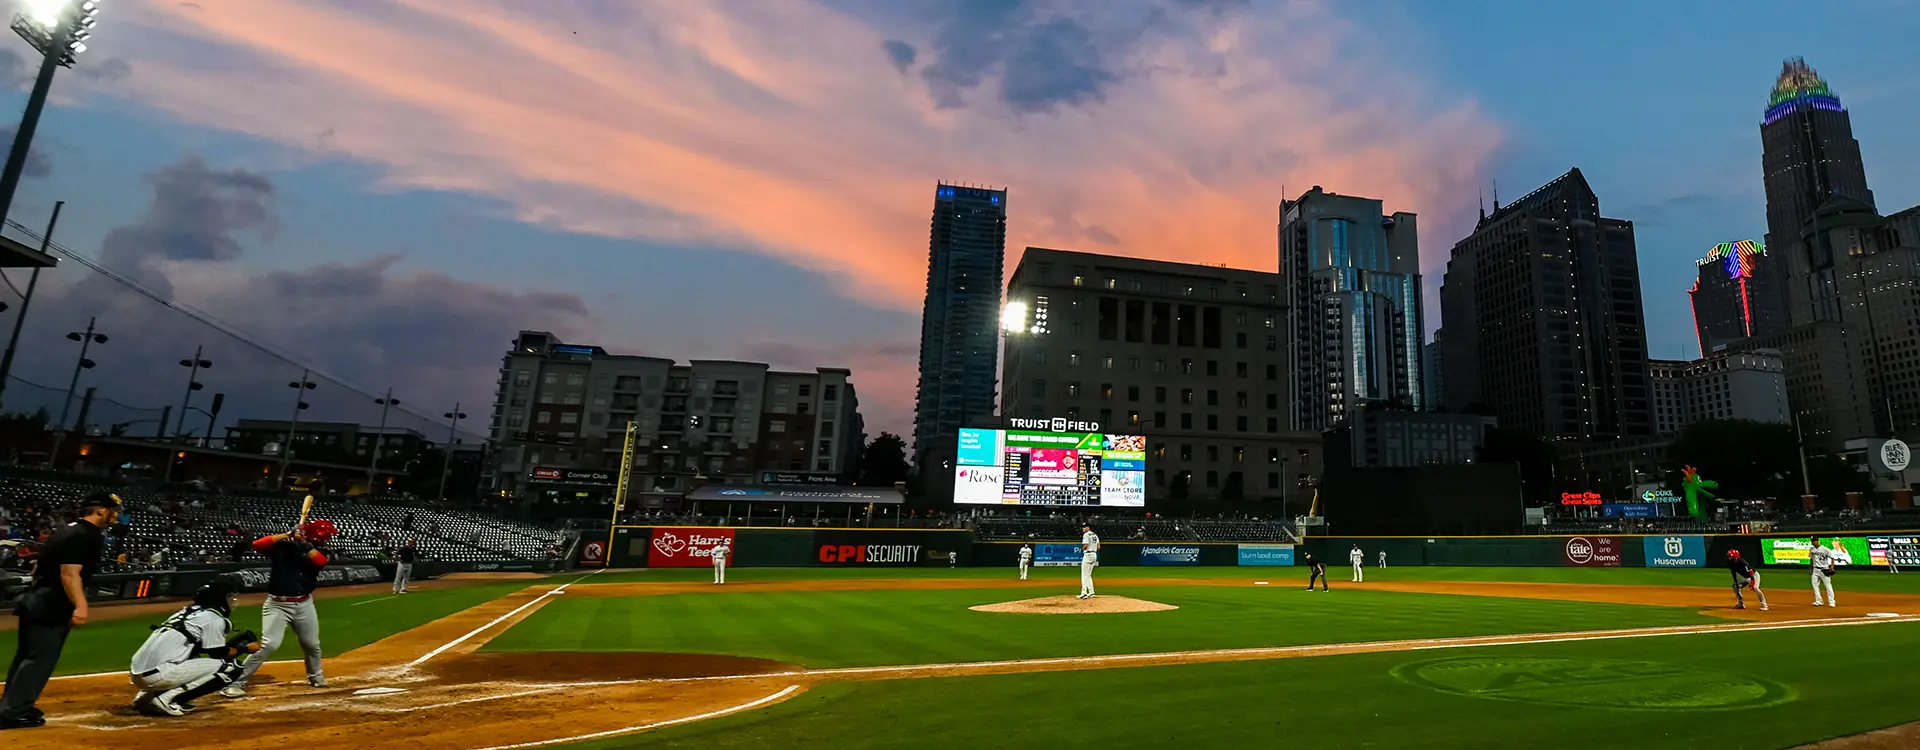 CPI Security X Charlotte Knights | Smart Home Security & Alarm Monitoring